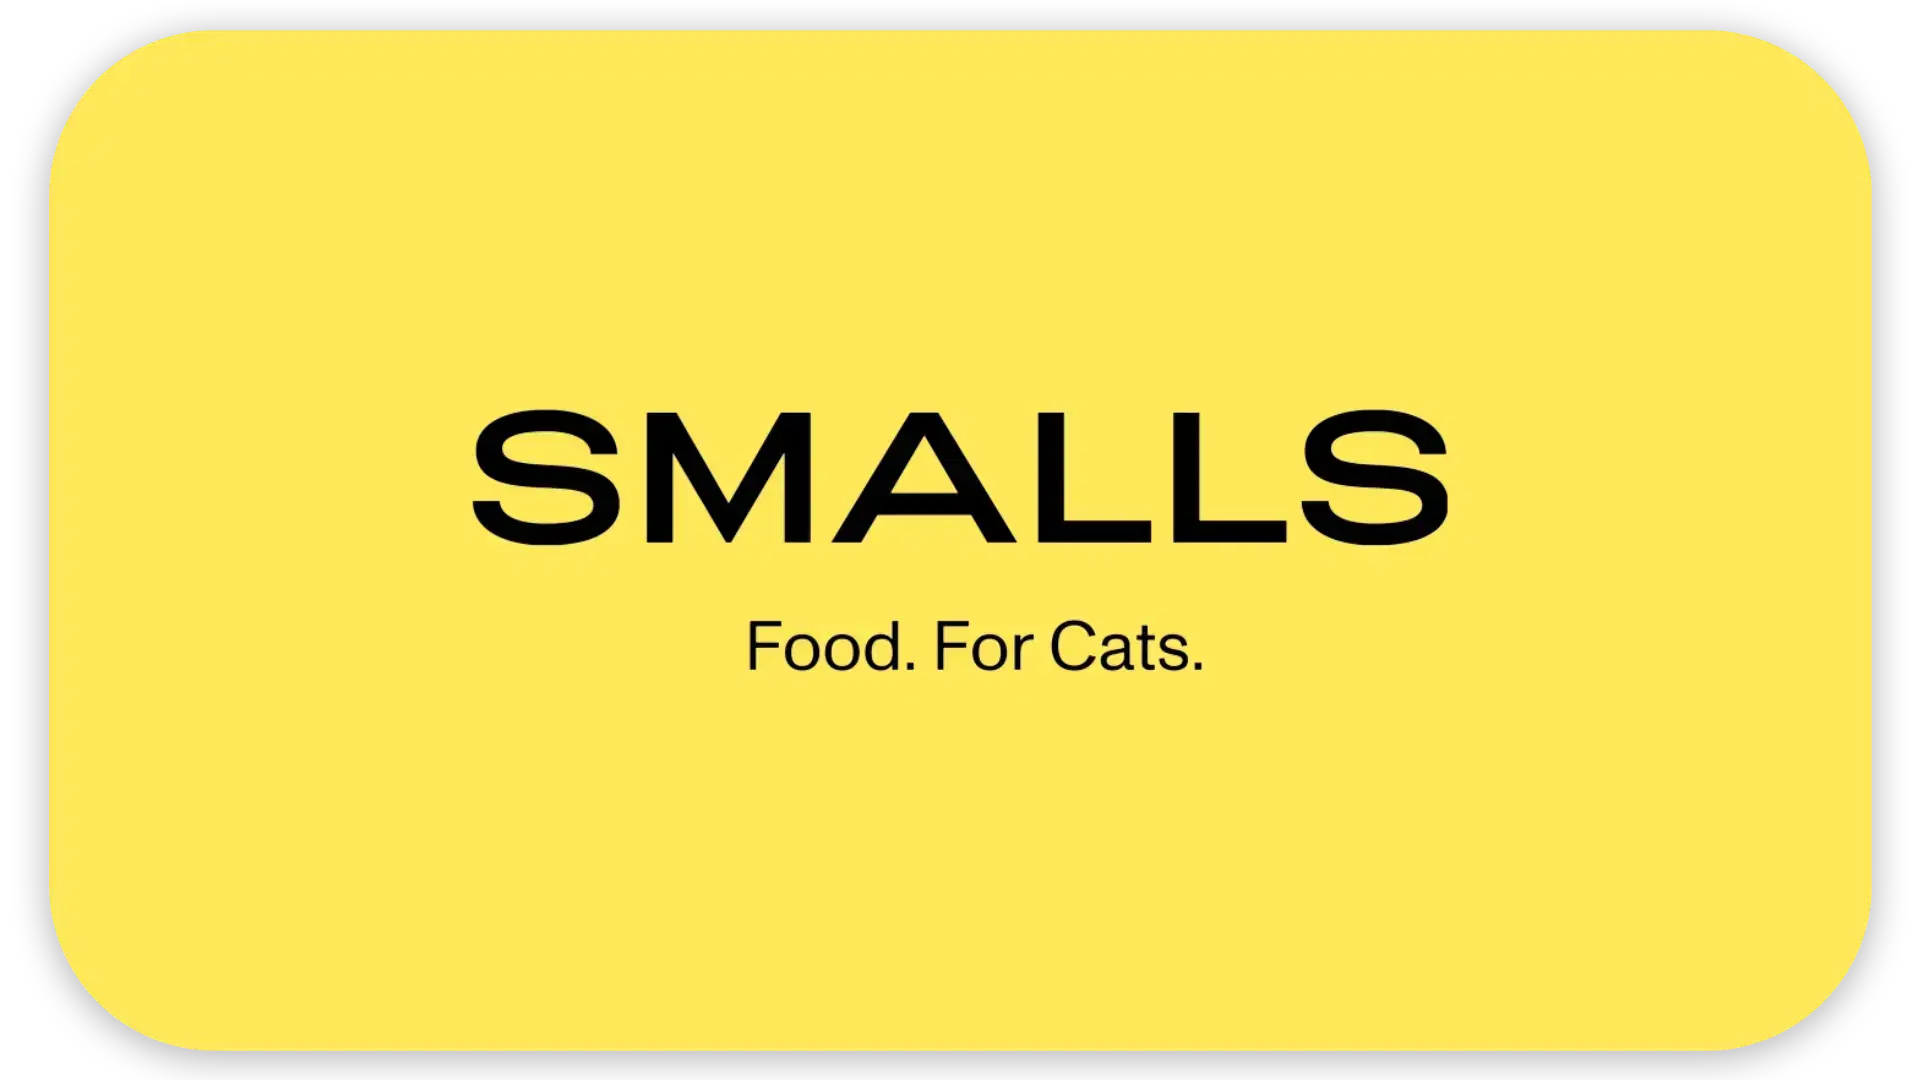 A yellow background displays the word "SMALLS" in large black letters with "Food. For Cats." in smaller black letters beneath it.